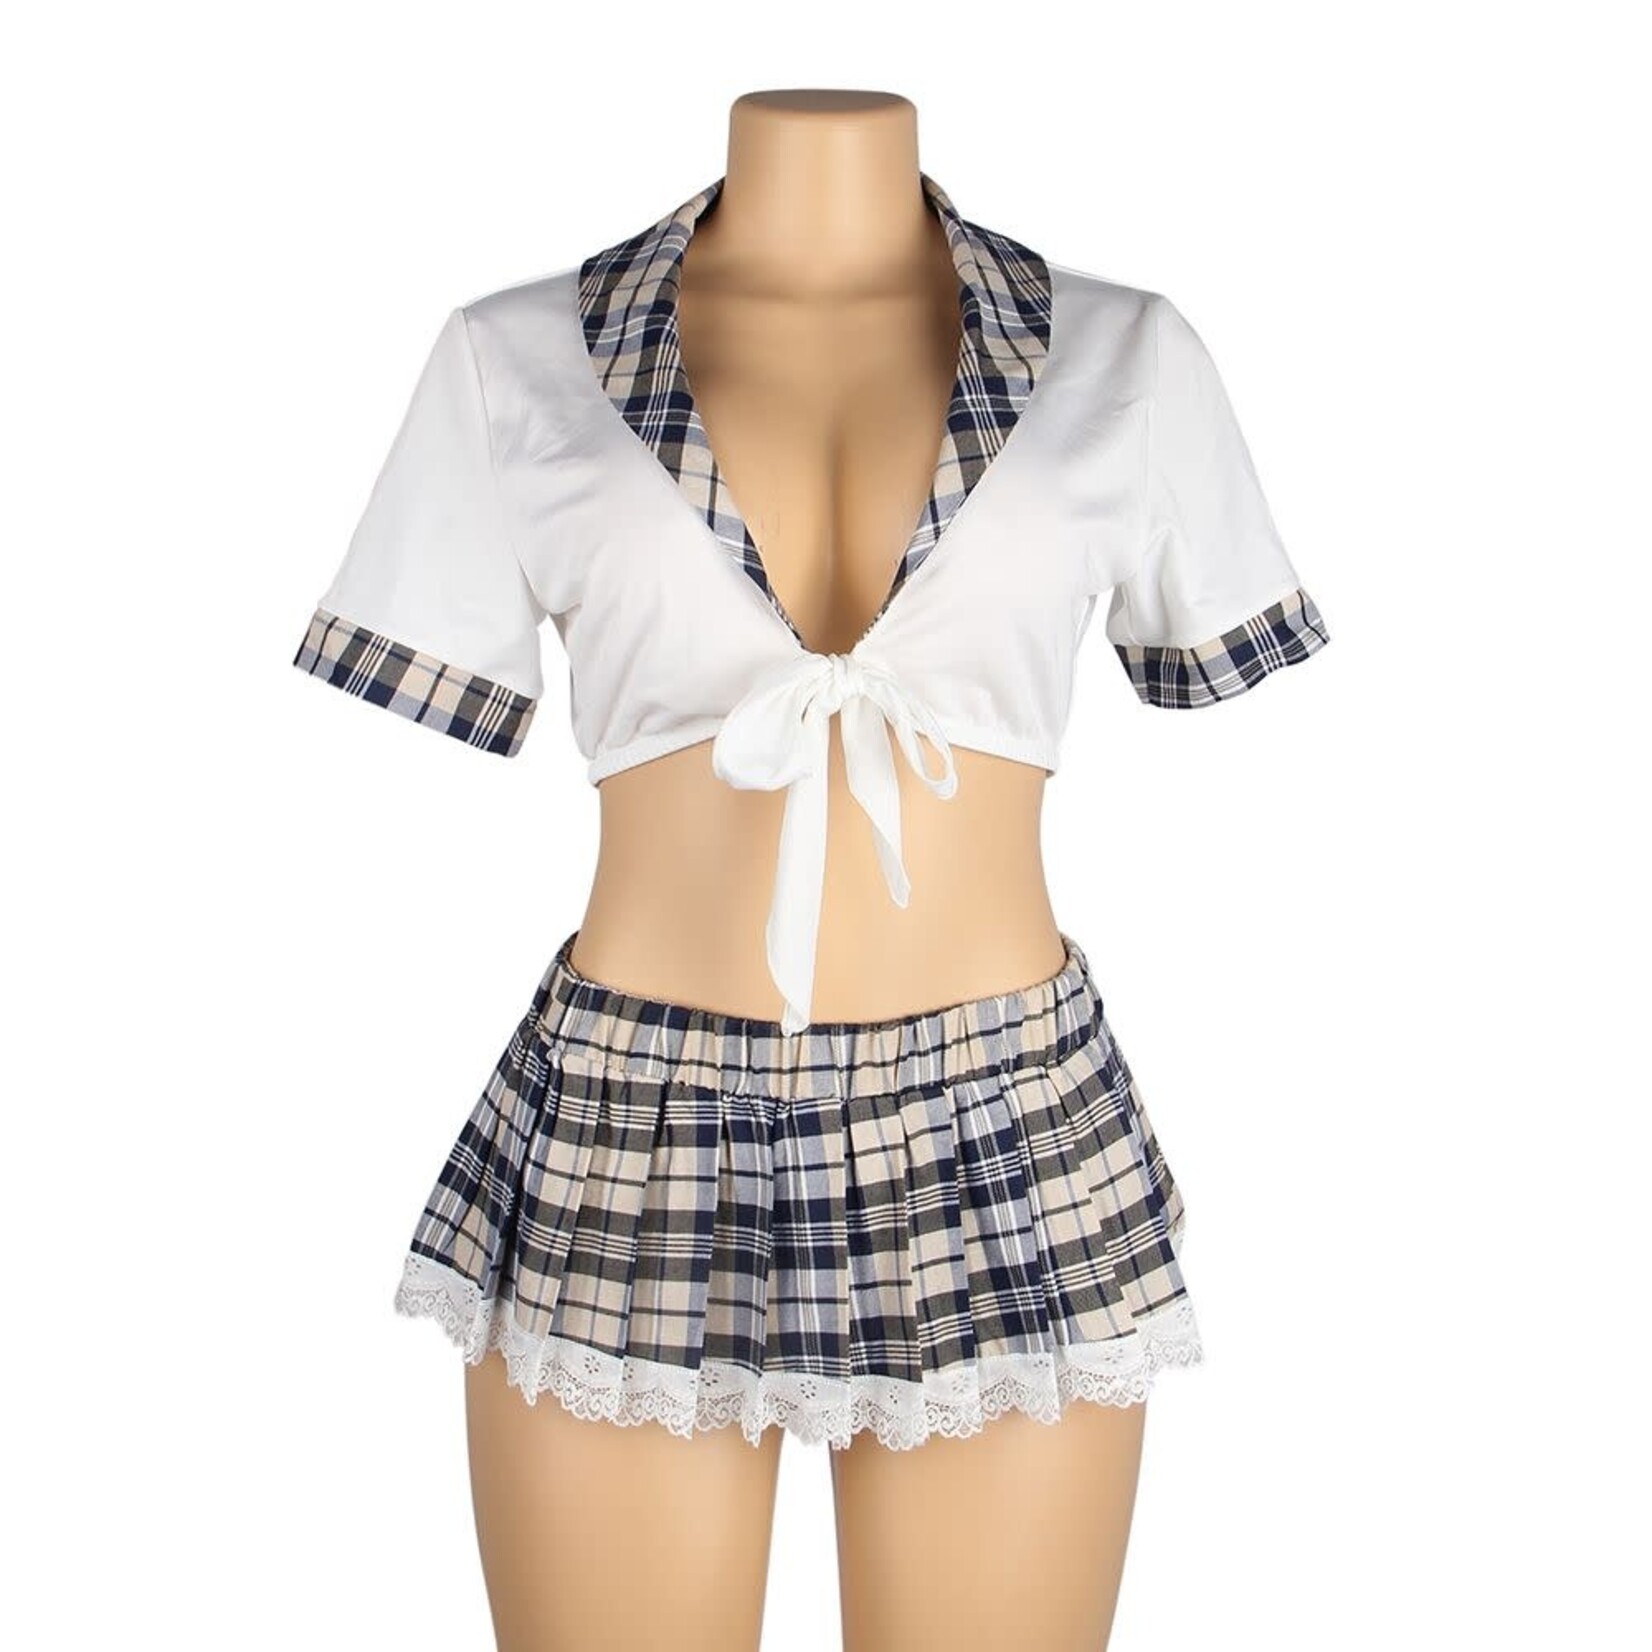 OH YEAH! -  SEXY WHITE CROP TOP PLAID SKIRT COSPLAY SUIT UNIFORM XS-S